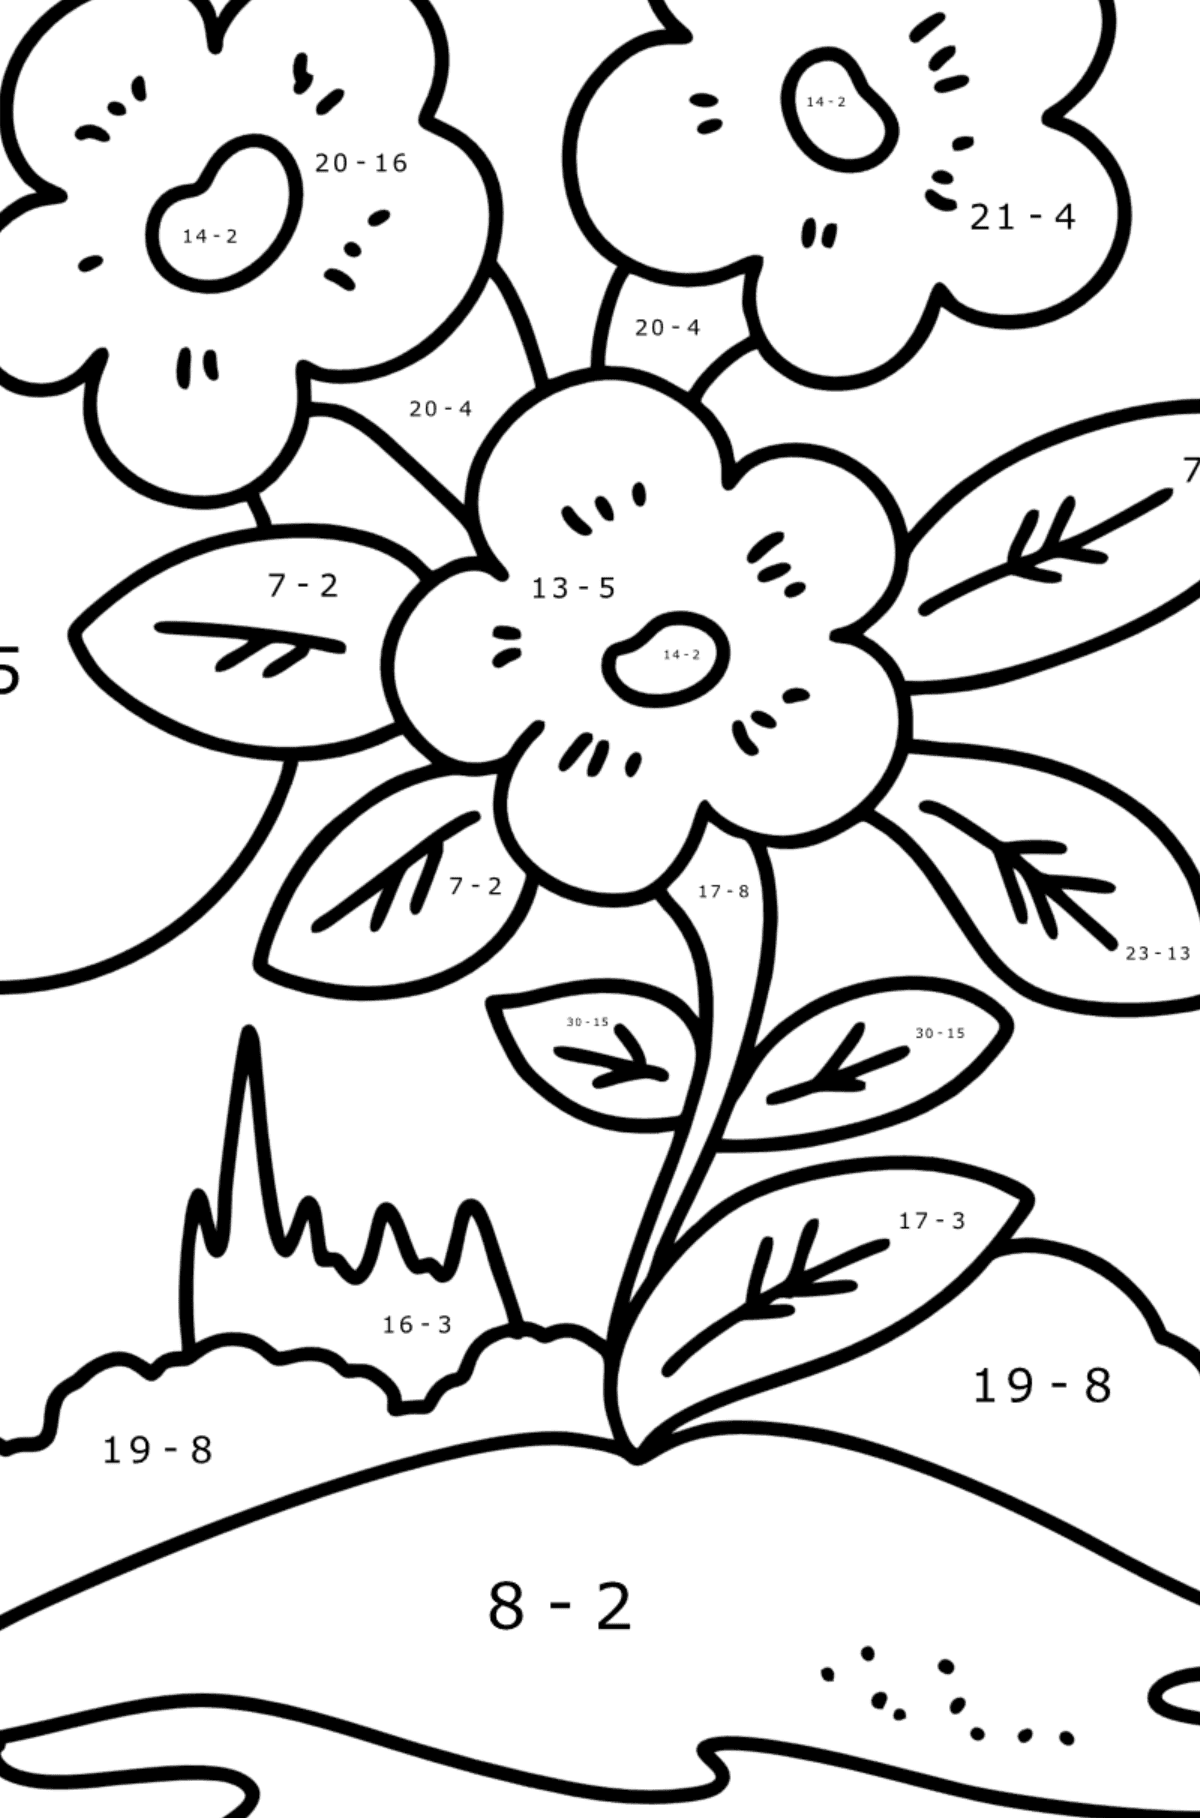 Spring flowers coloring page for Kids - Math Coloring - Subtraction for Kids